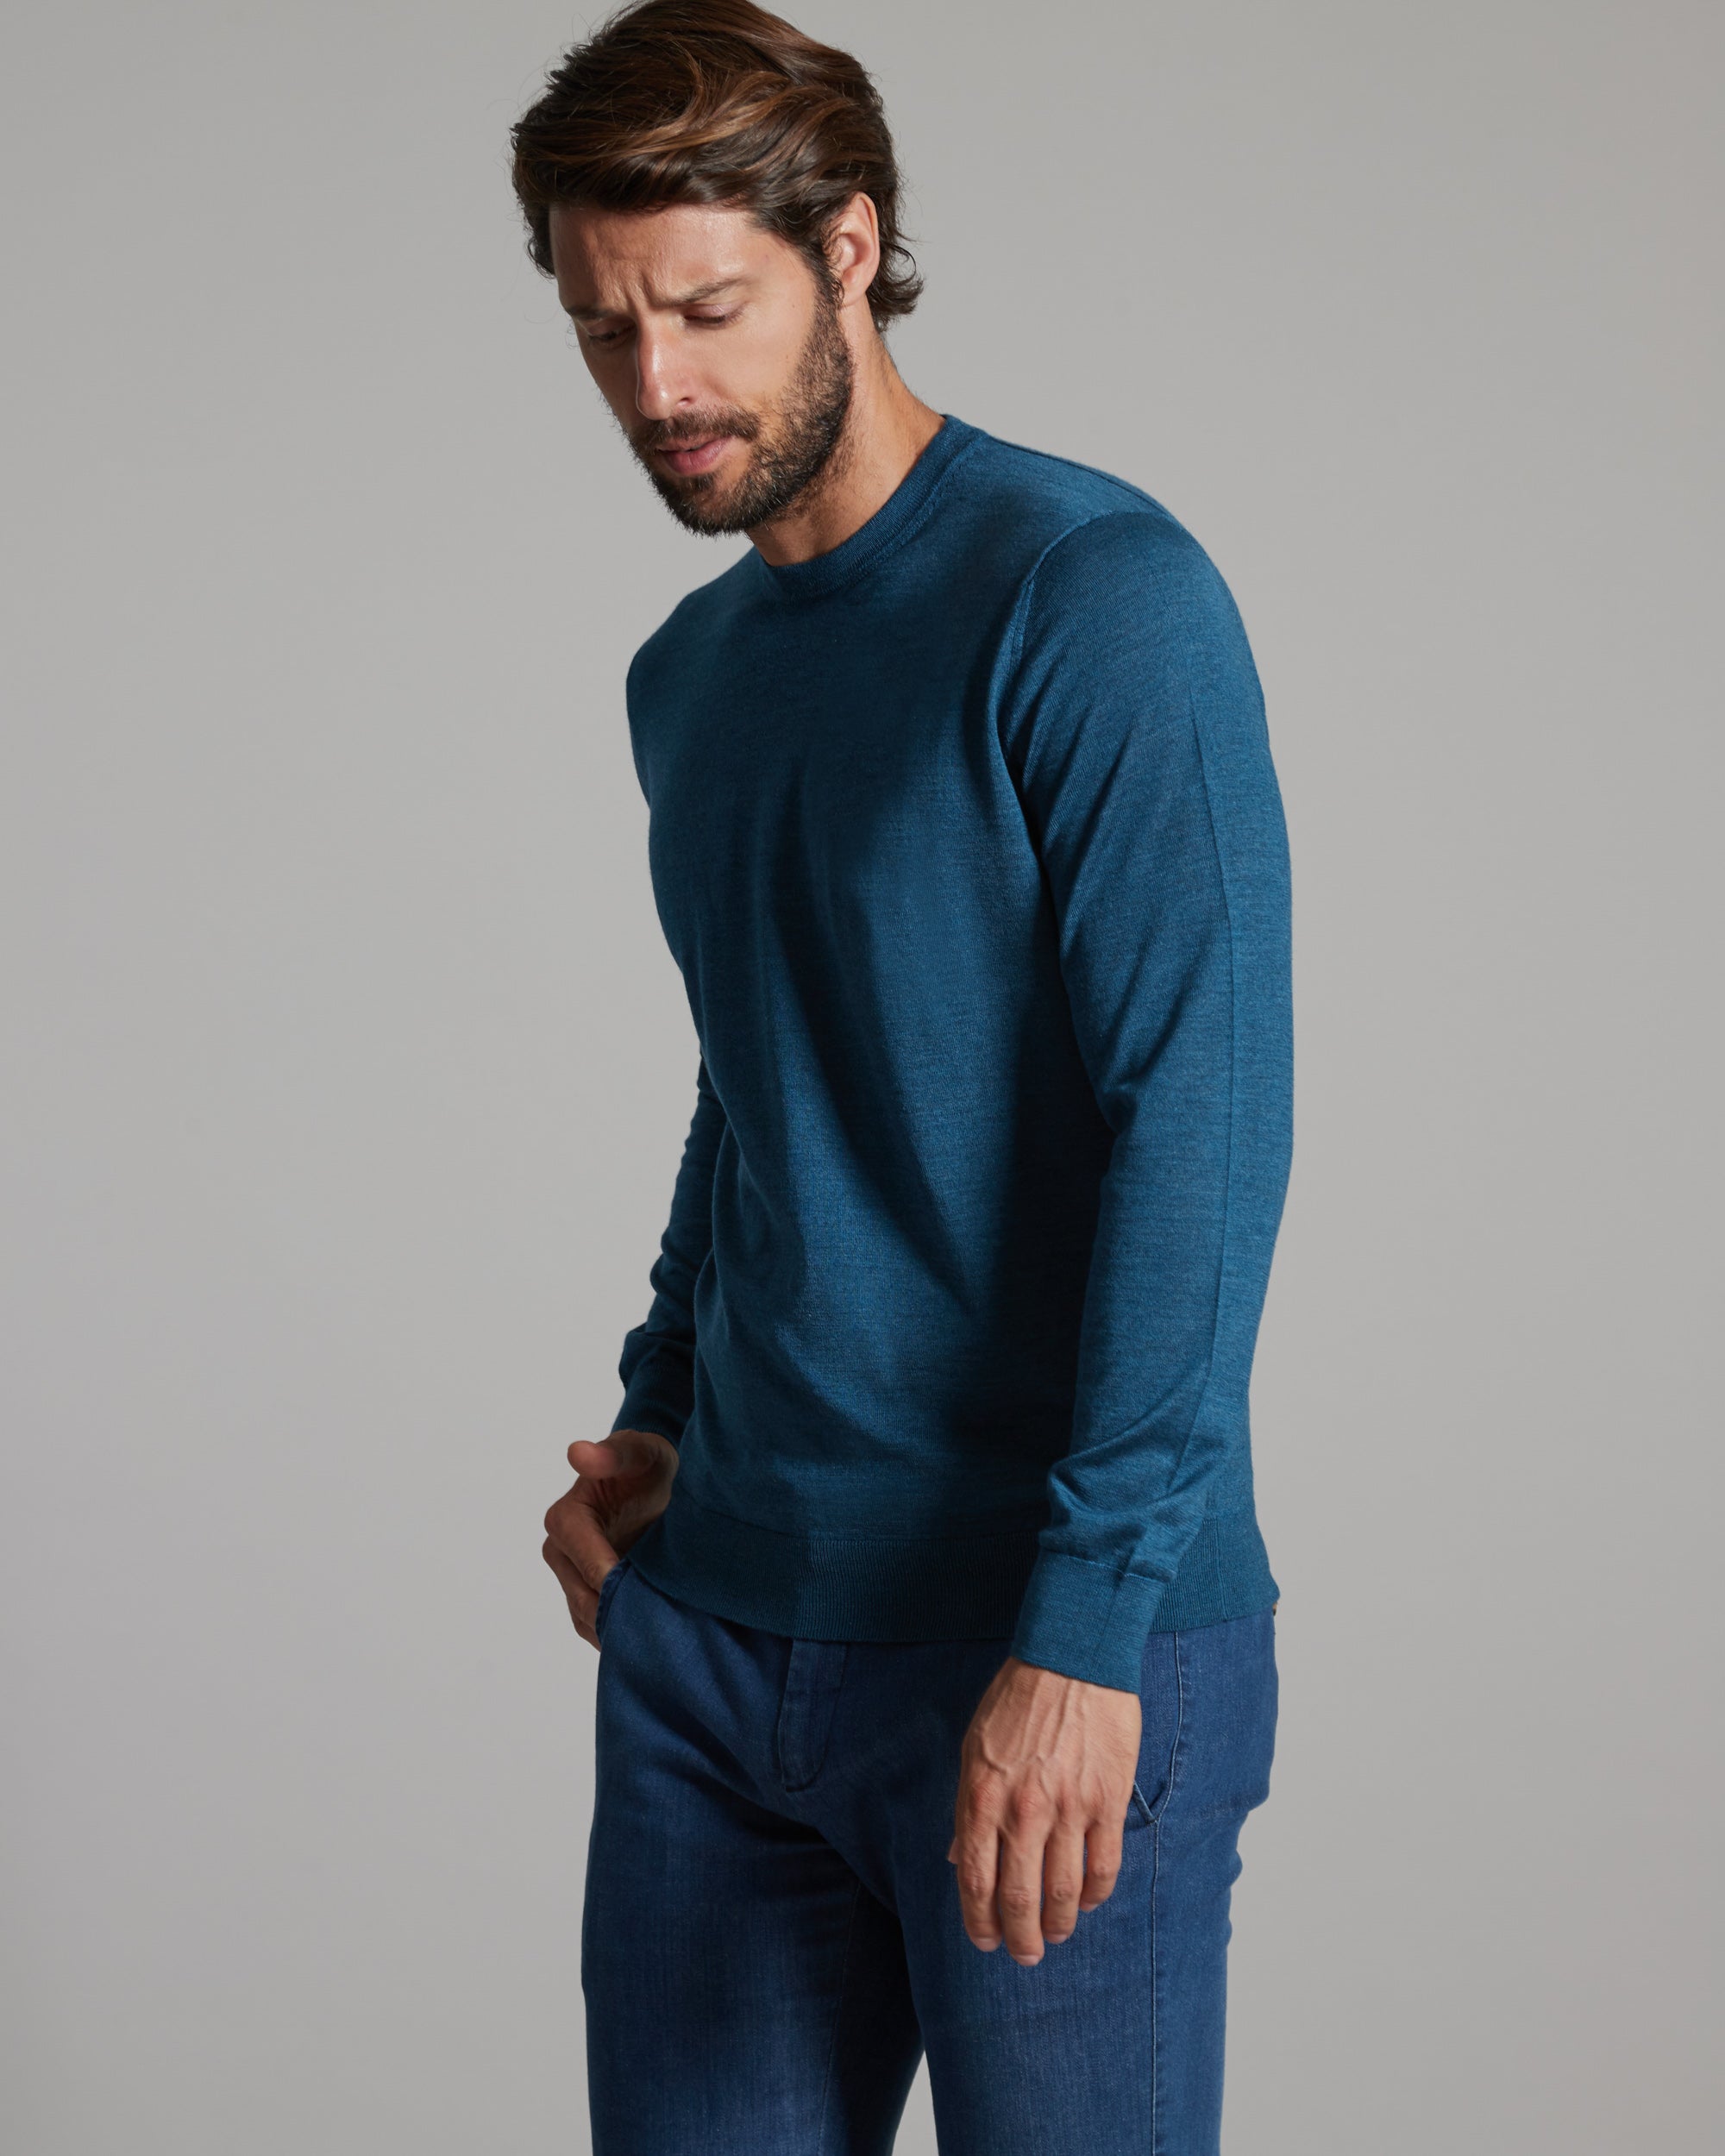 Teal Blue cashmere and silk men's round-neck sweater